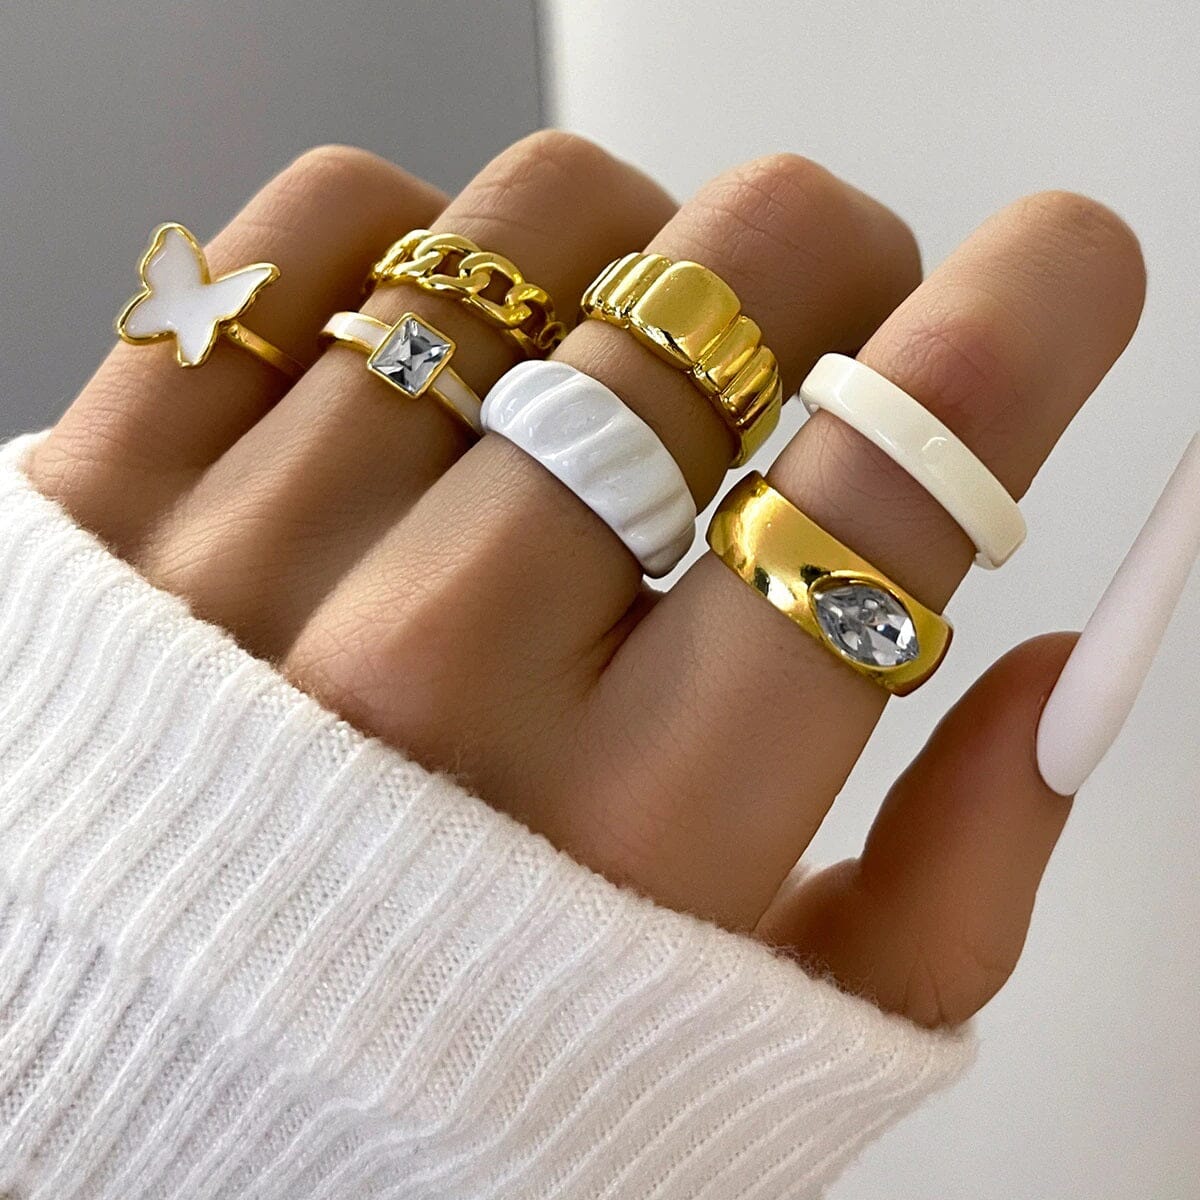 Women Teen Girls Vintage Cute Fashion Knuckle Stacking Ring Set_ Jewelry jehouze 8 